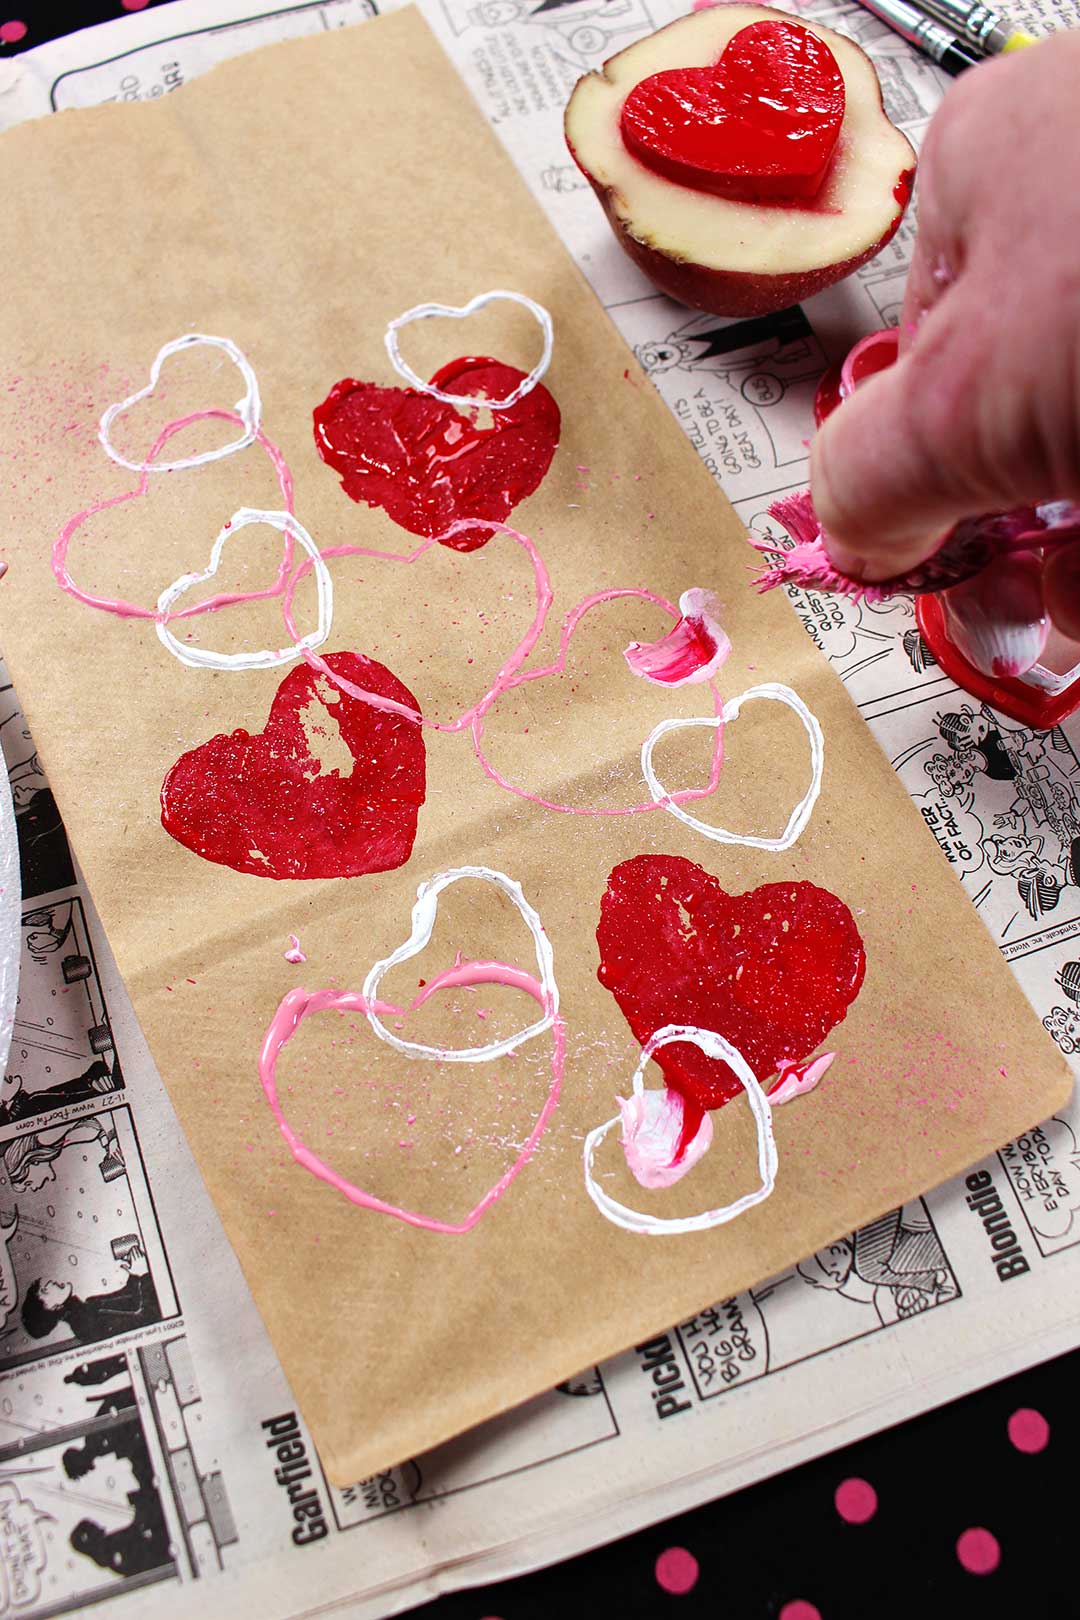 Pink, red and white painted hearts on brown paper bag resting on page of newsprint. Hand scraping toothbrush dipped in pink paint to make splatter pattern.